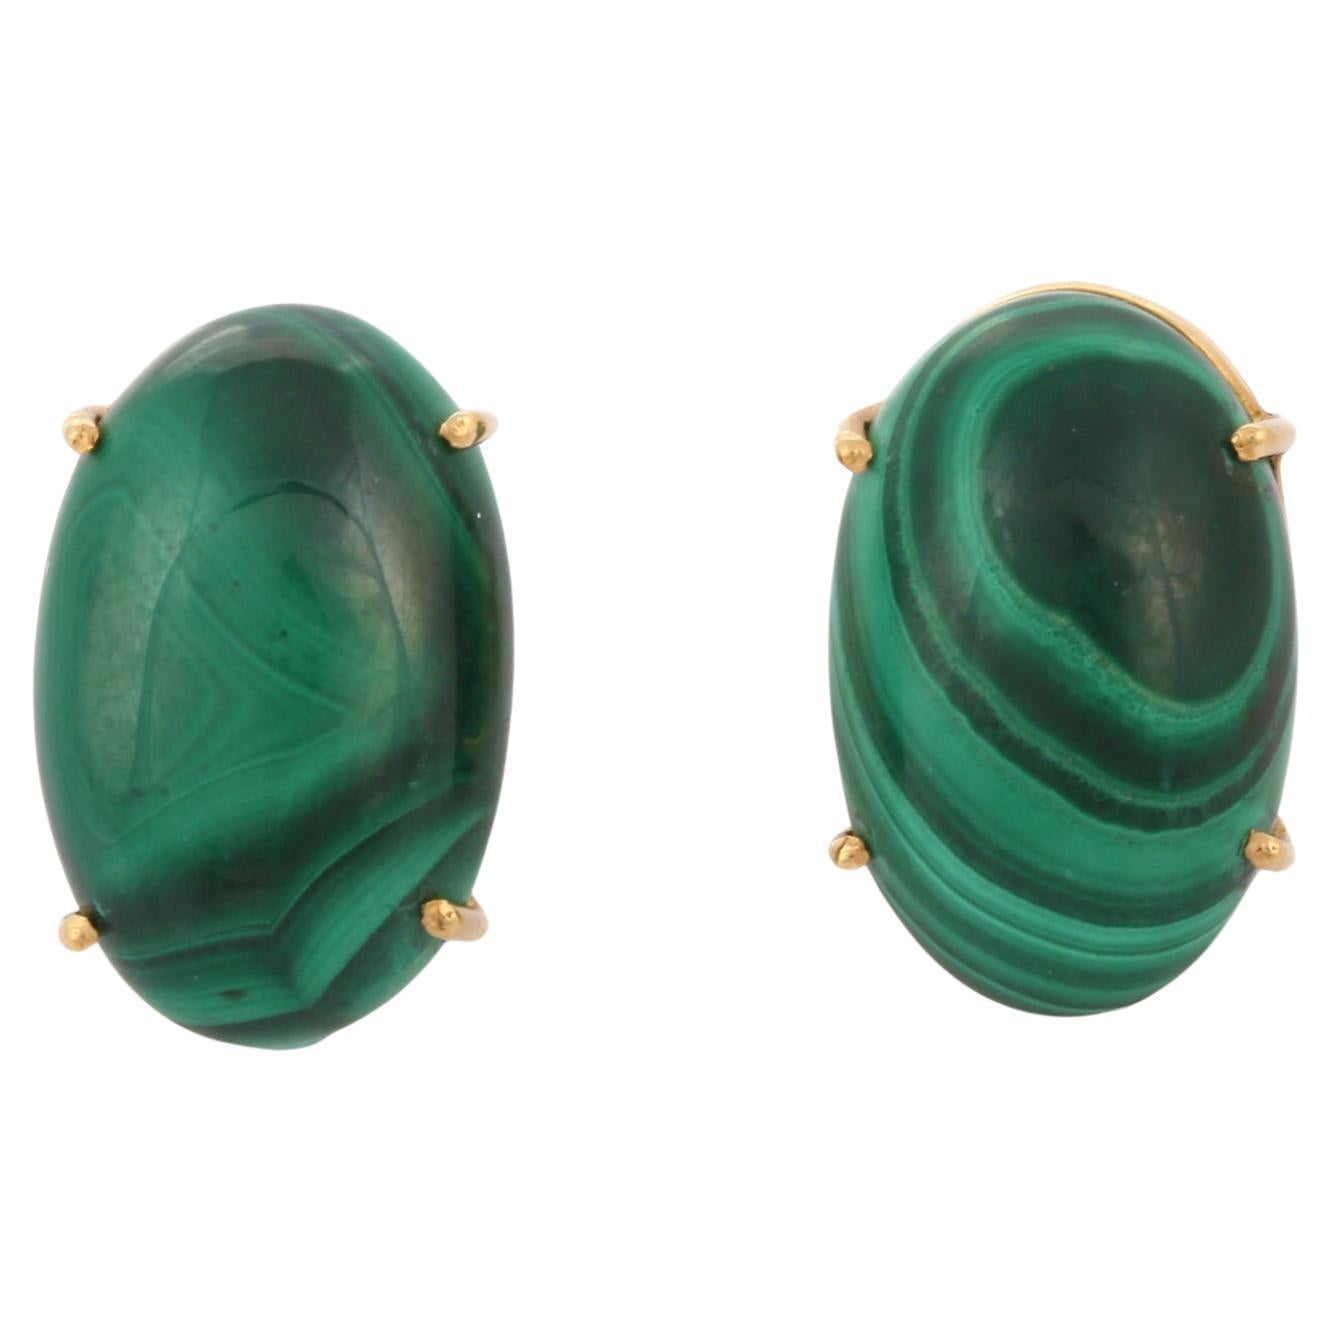 Statement Elliptical Malachite Solitaire Stud Earrings in 18K Yellow Gold